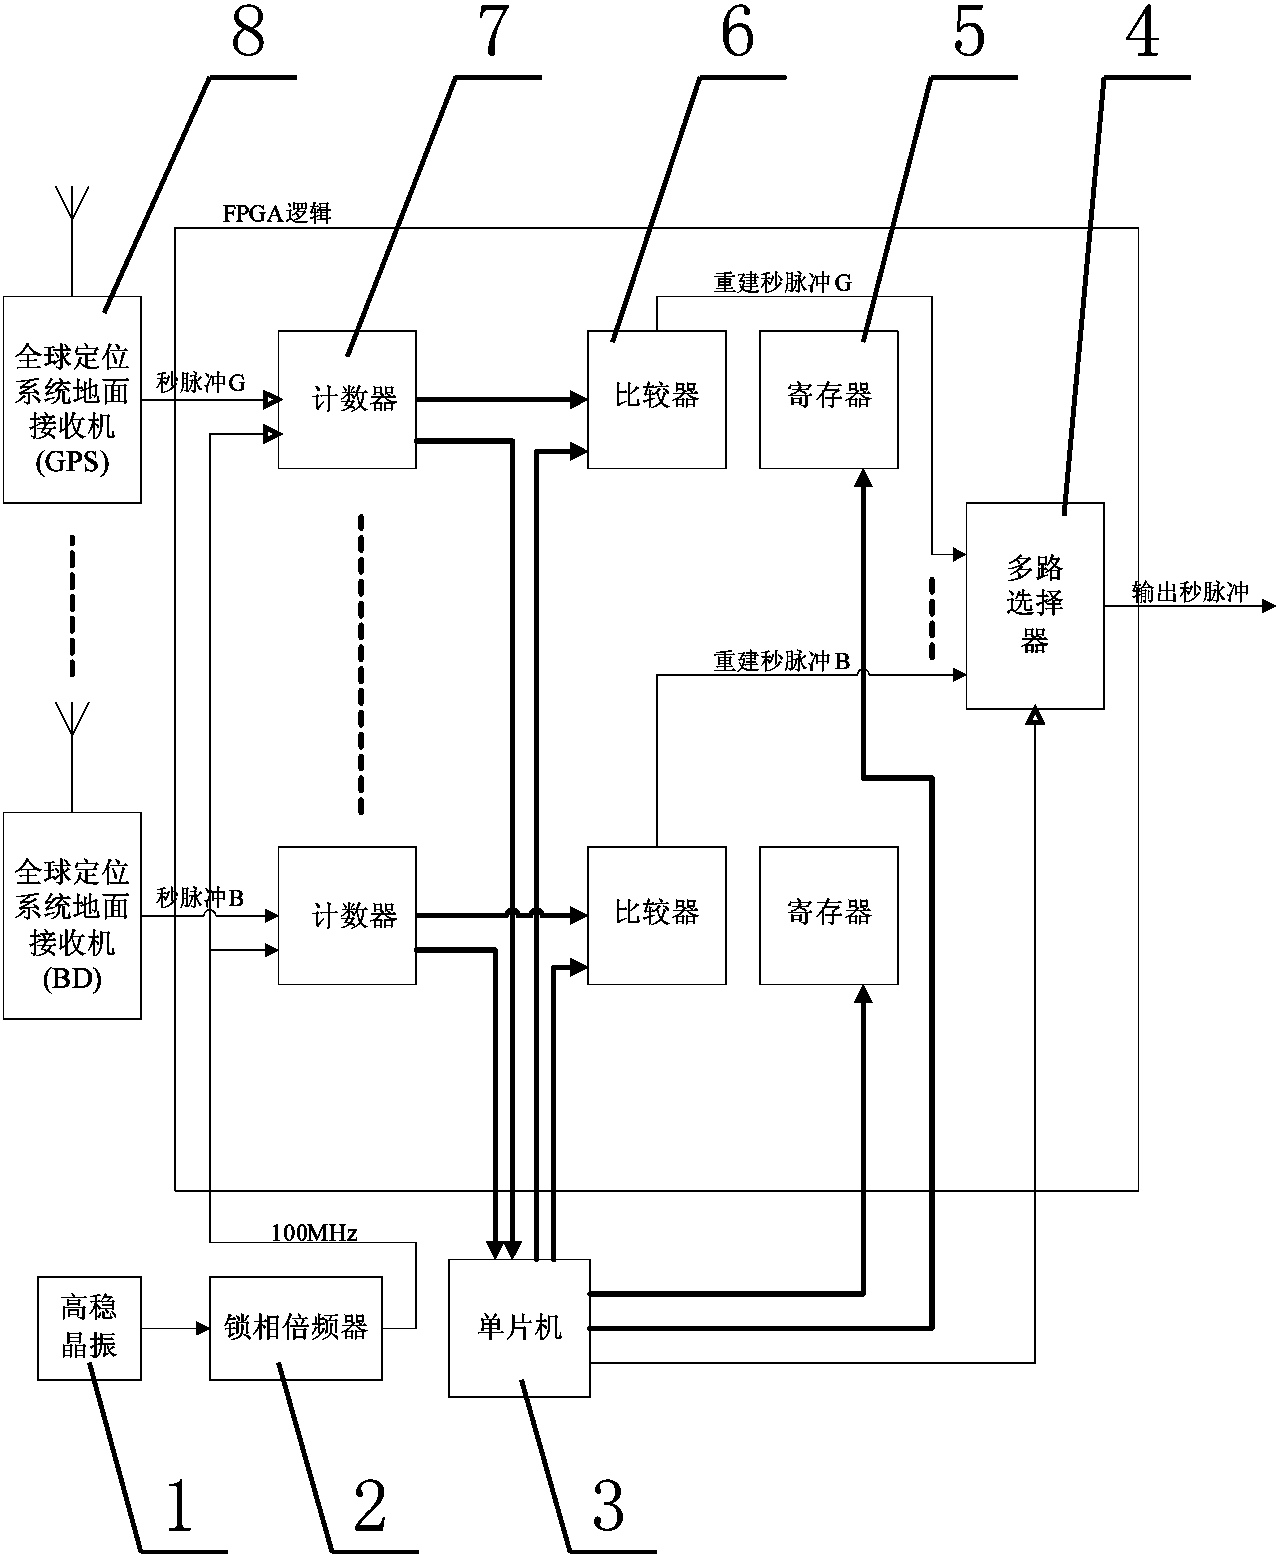 Optimizing time synchronizing device for multi-channel clock sources